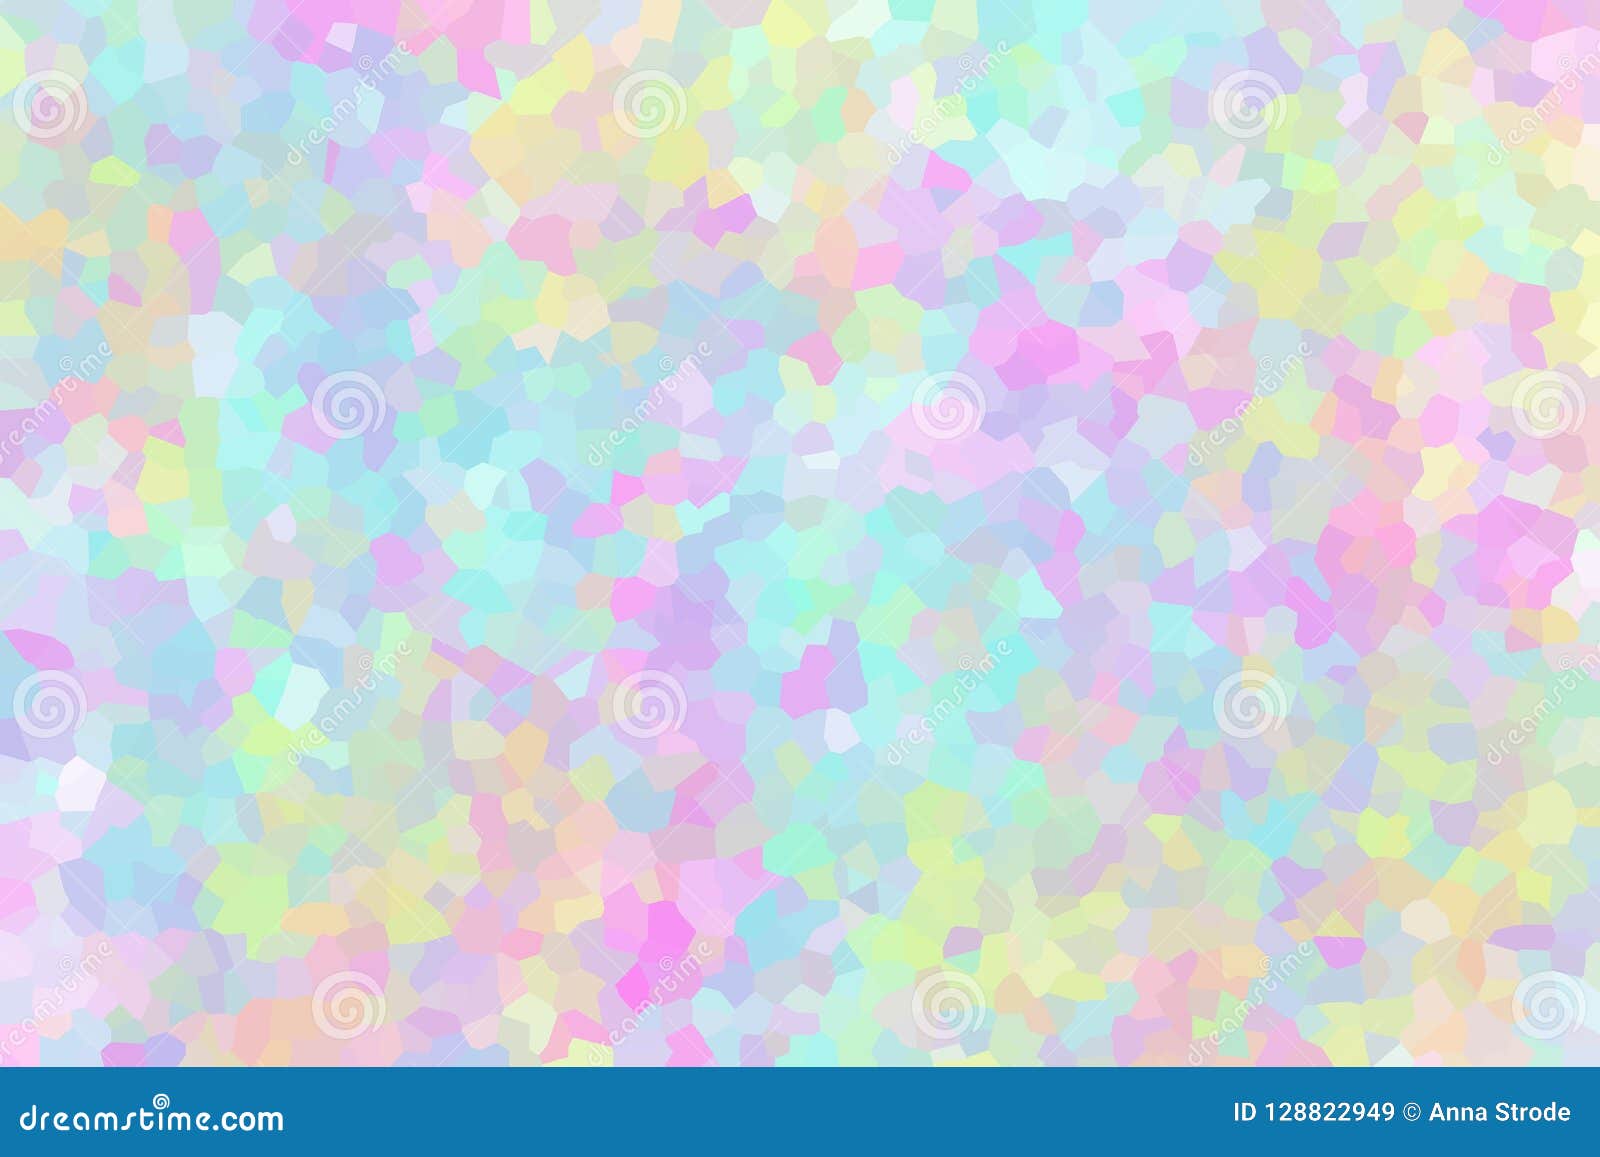 Background in Pastel Colors - Pink, Yellow and Light Blue. Stock  Illustration - Illustration of background, light: 128822949